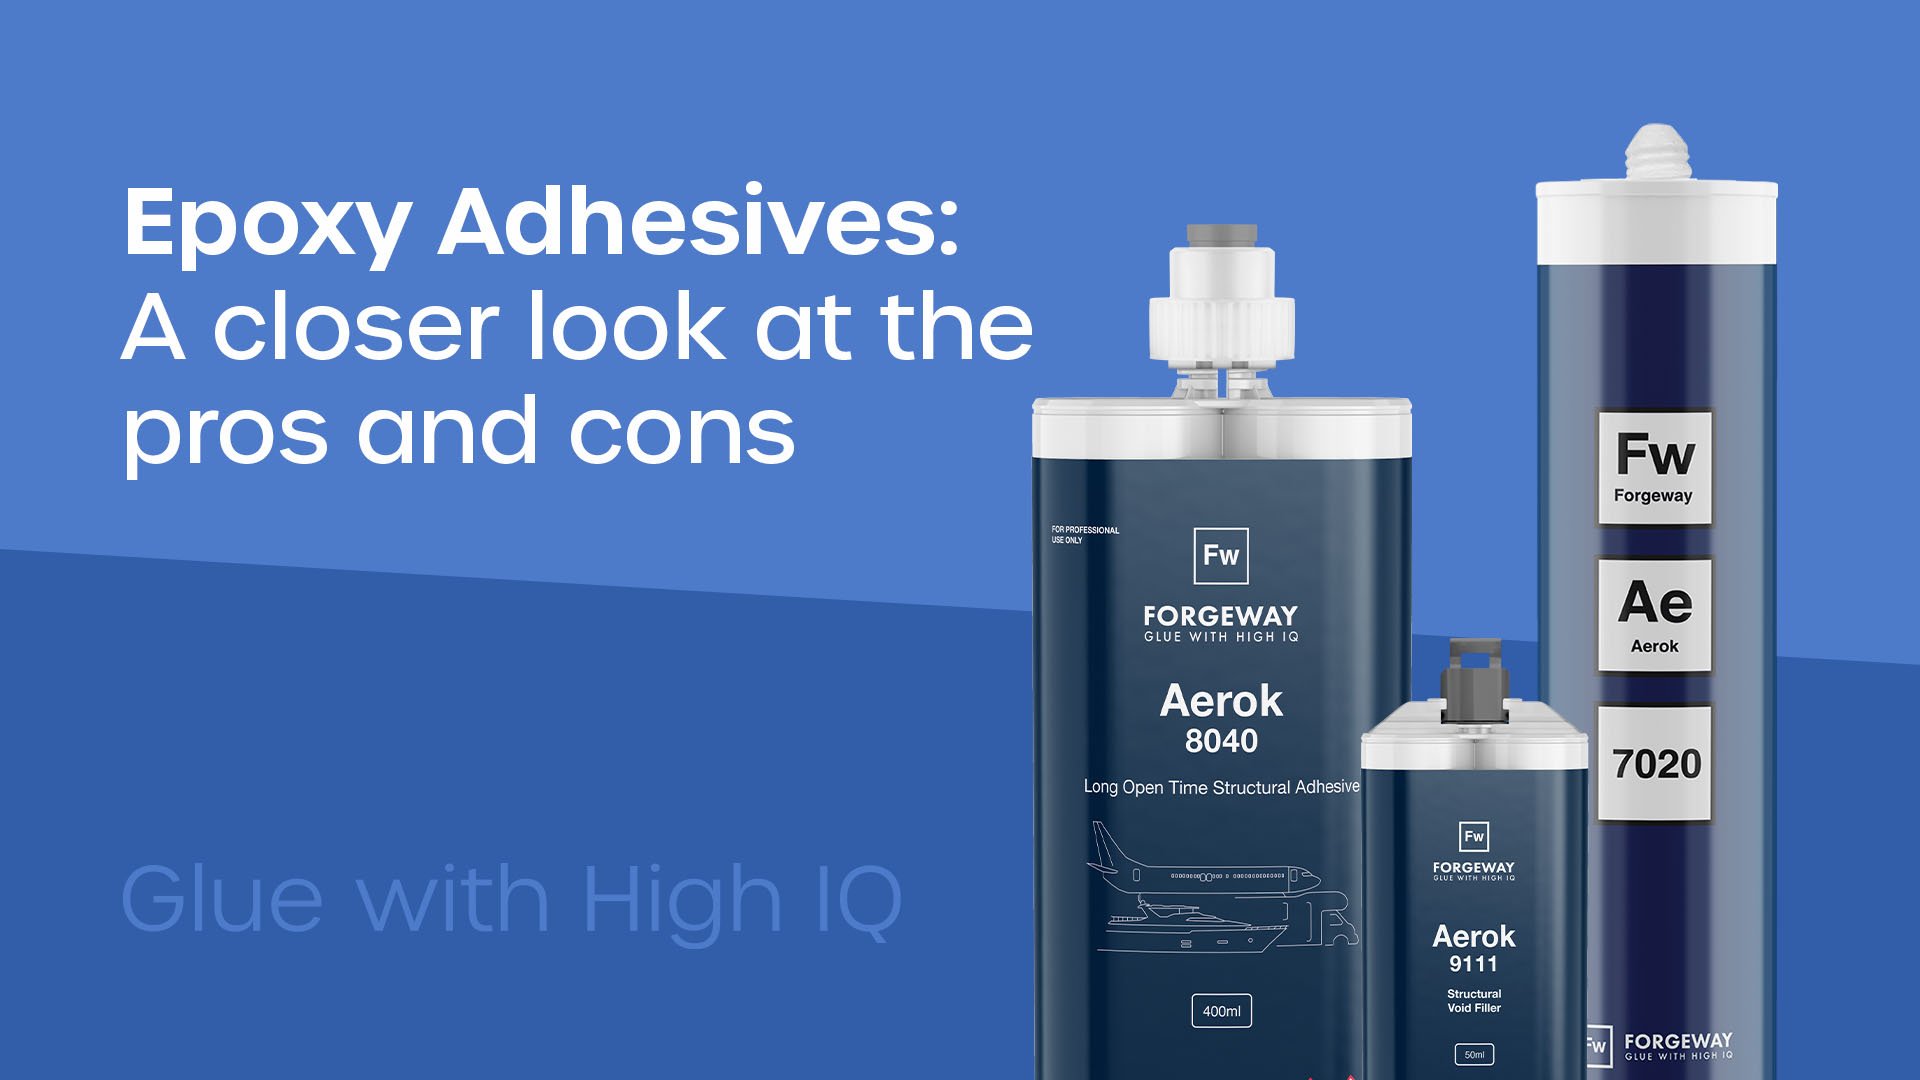 Epoxy Adhesives: A Closer Look at the Pros and Cons